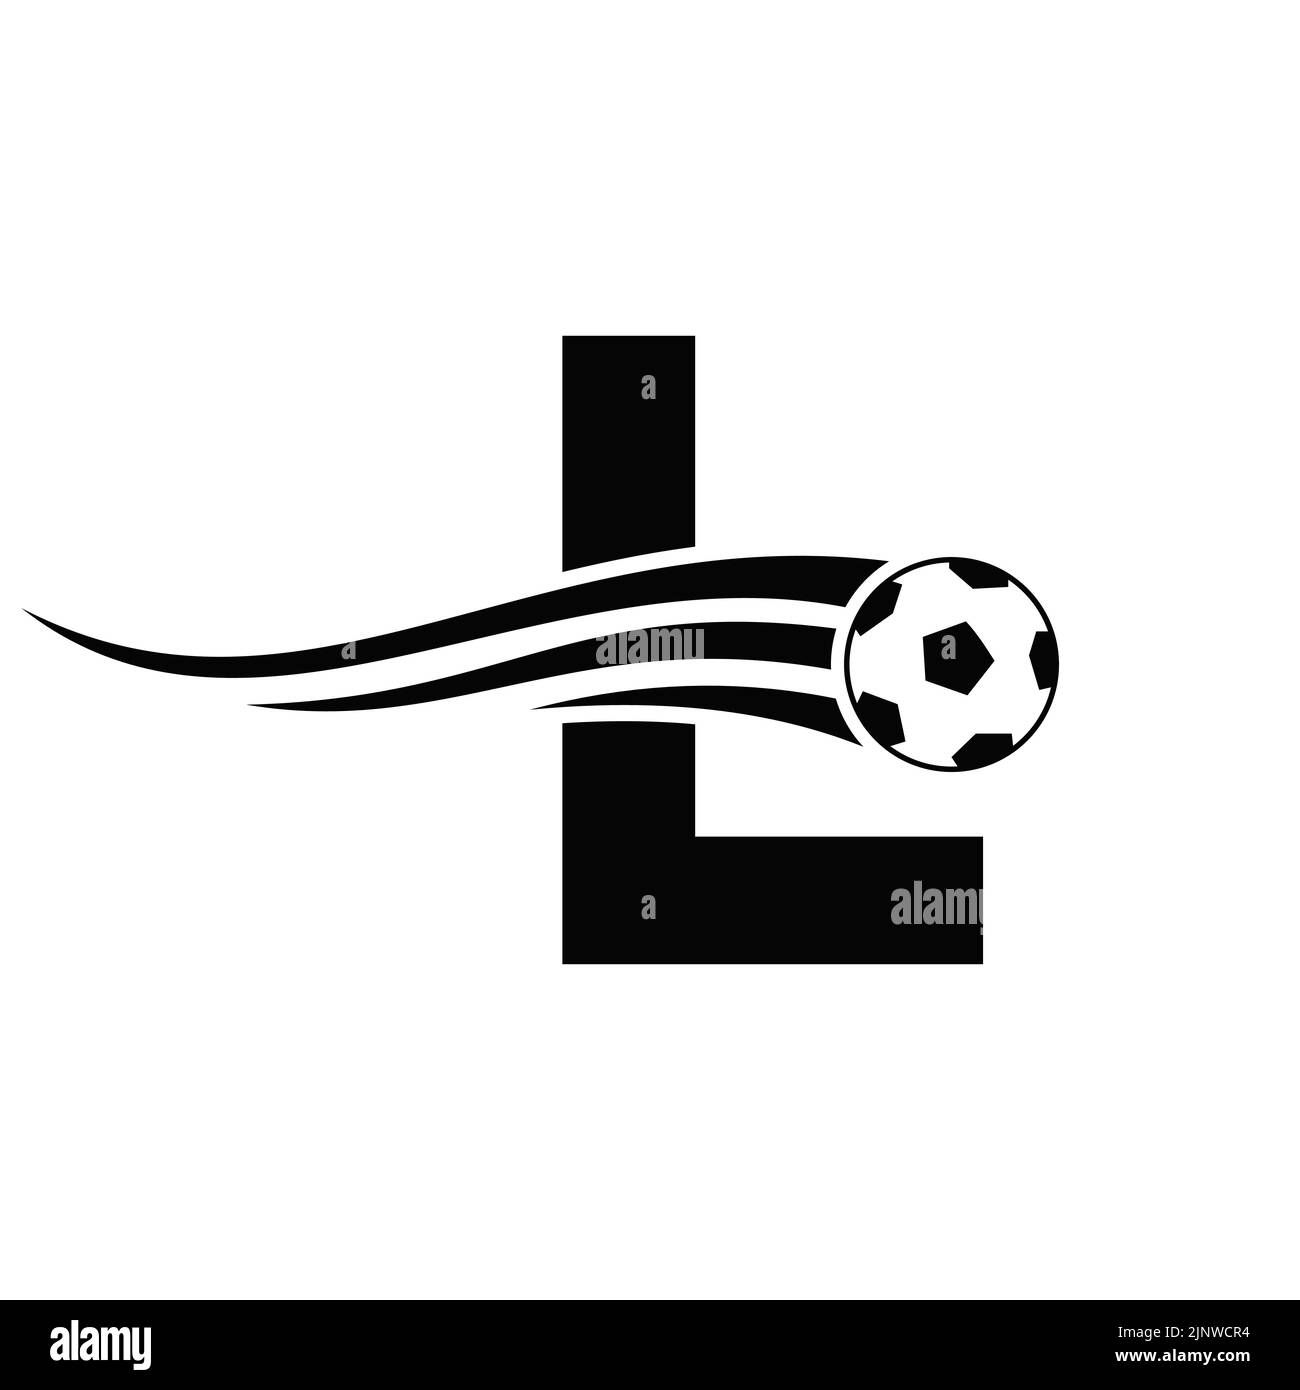 Soccer Football Logo On Letter L Sign. Soccer Club Emblem Concept Of Football Team Icon Stock Vector